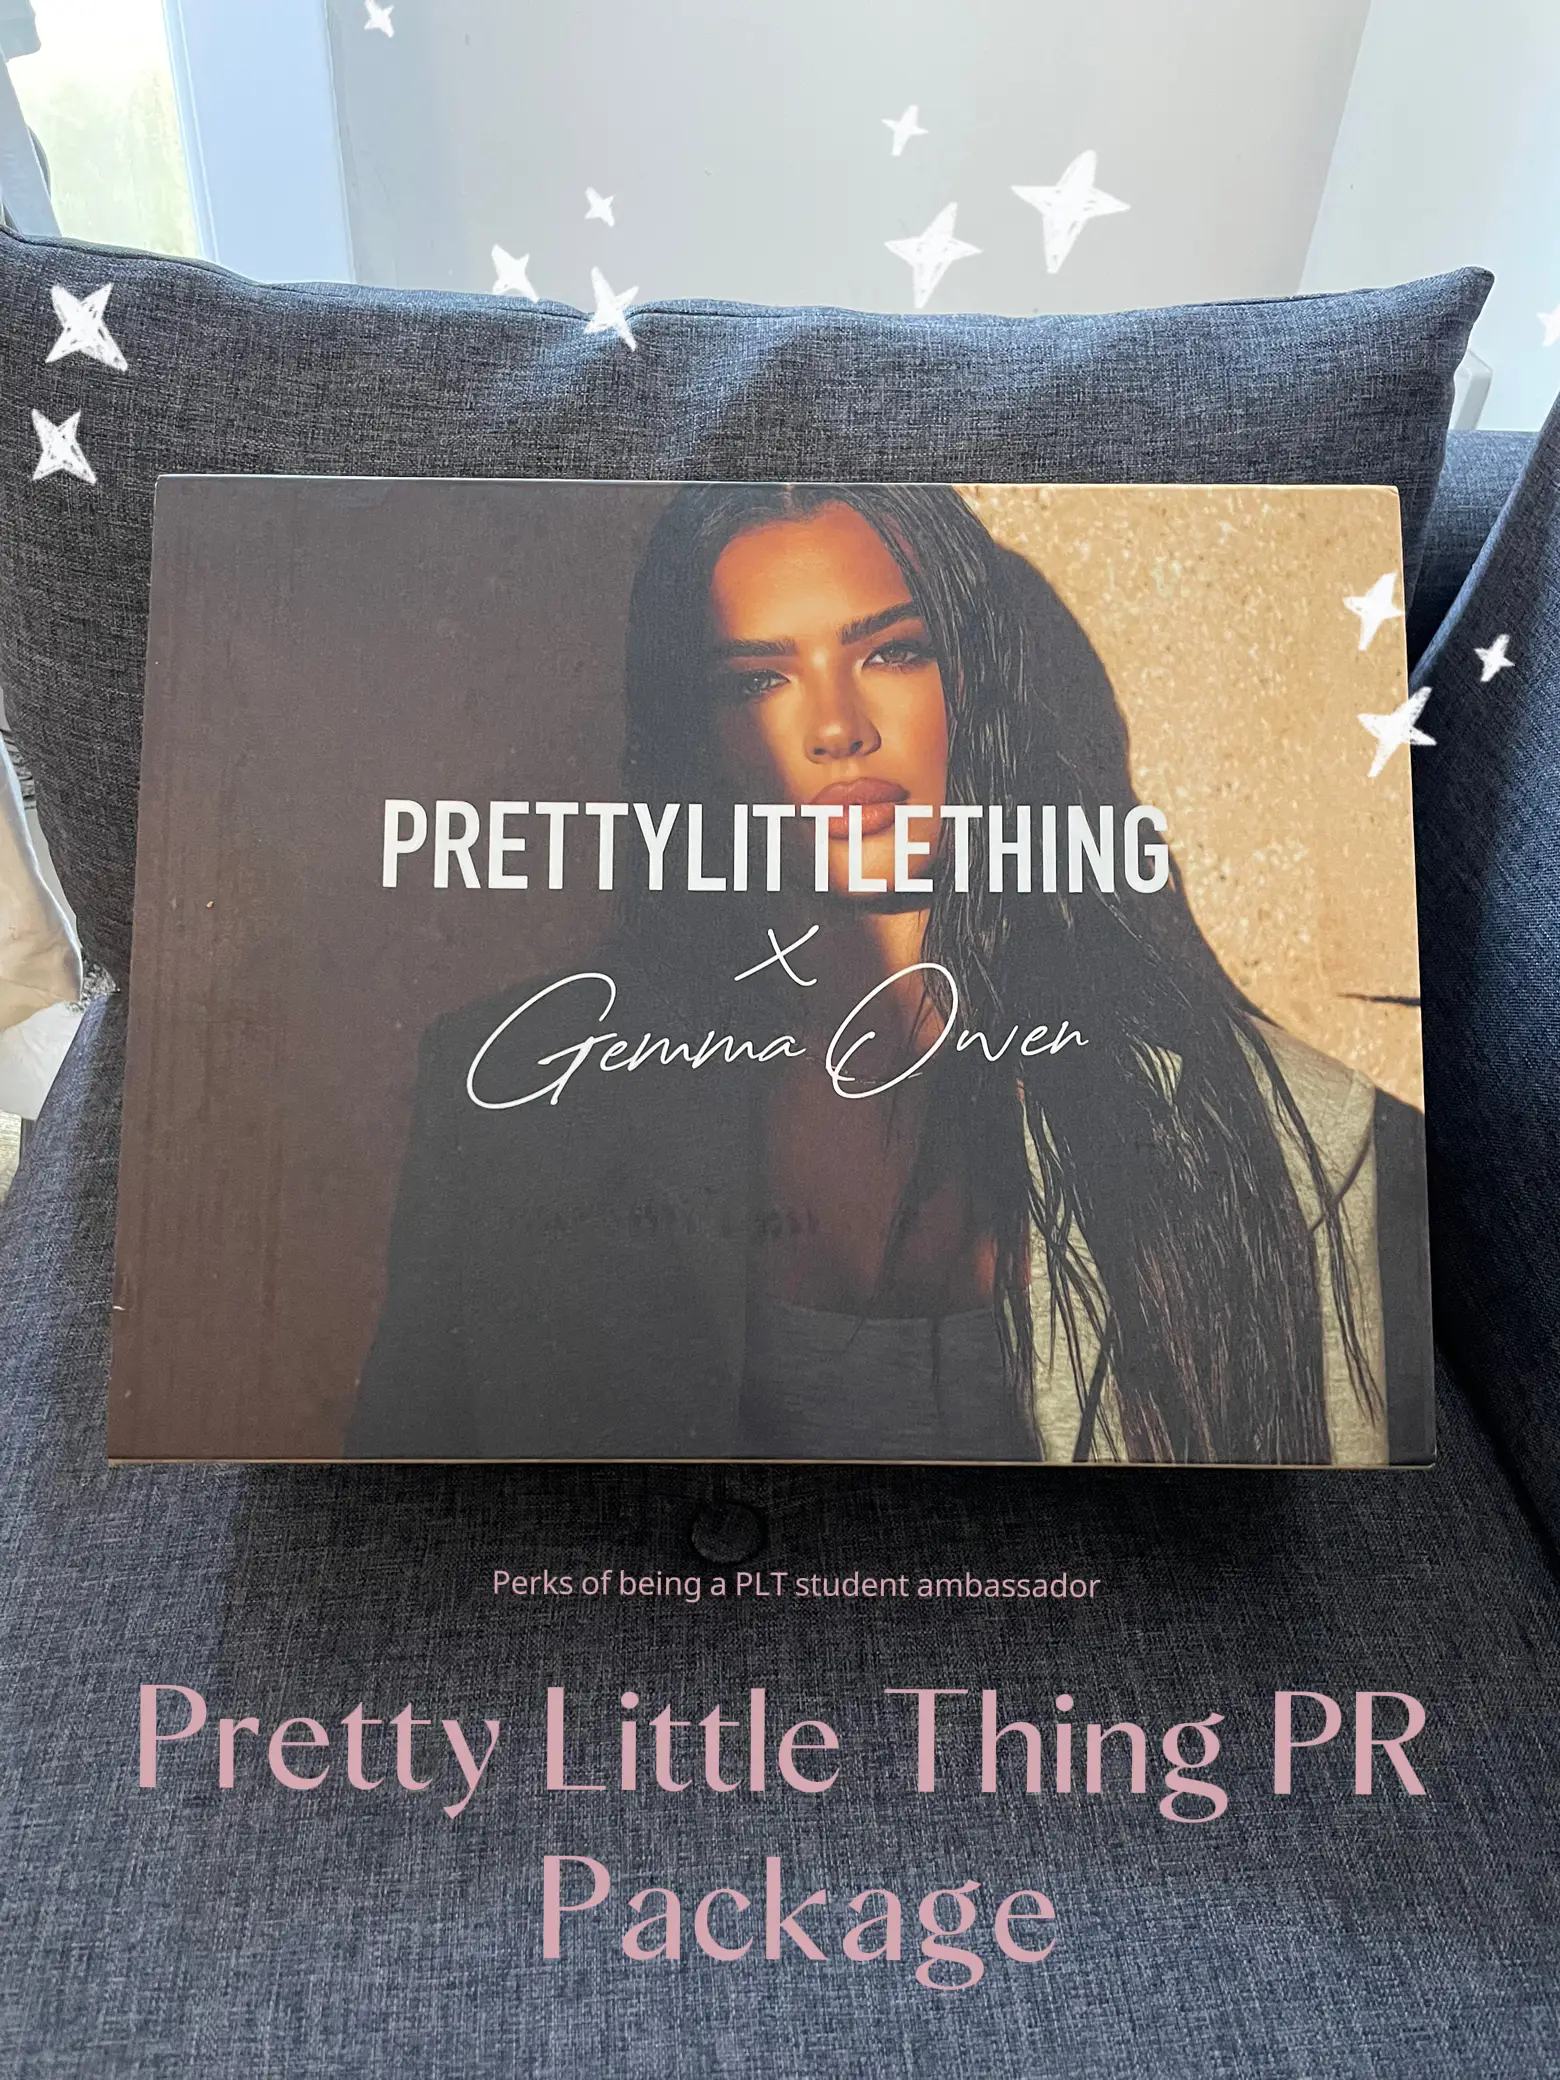 PrettyLittleThing Clothing Review @prettylittlething